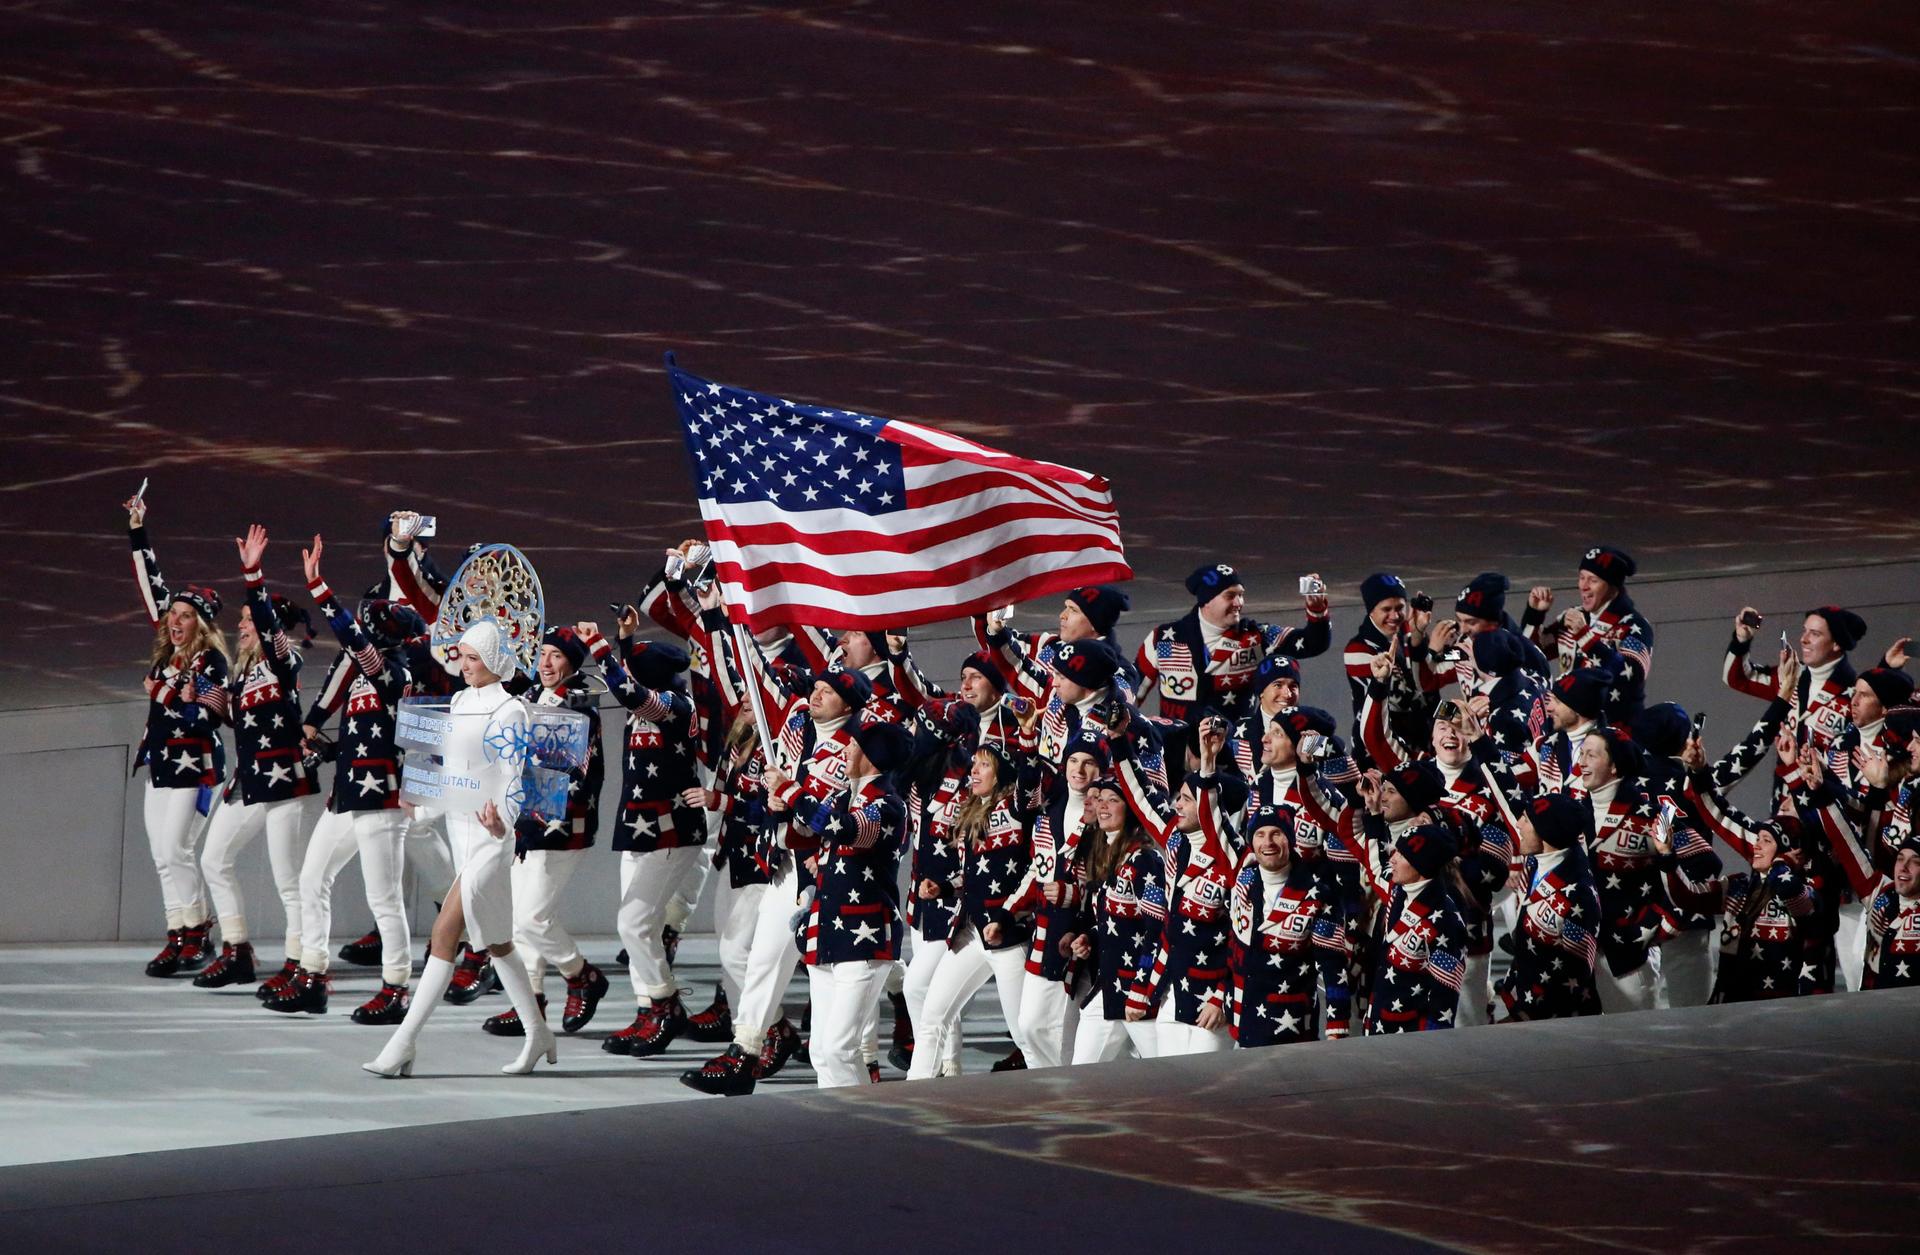 Flag-bearer Todd Lodwick of the U.S. leads his country's contingent during the athletes' parade at the opening ceremony of the Sochi 2014 Winter Olympic Games February 7, 2014. REUTERS/Grigory Dukor (RUSSIA - Tags: OLYMPICS SPORT)